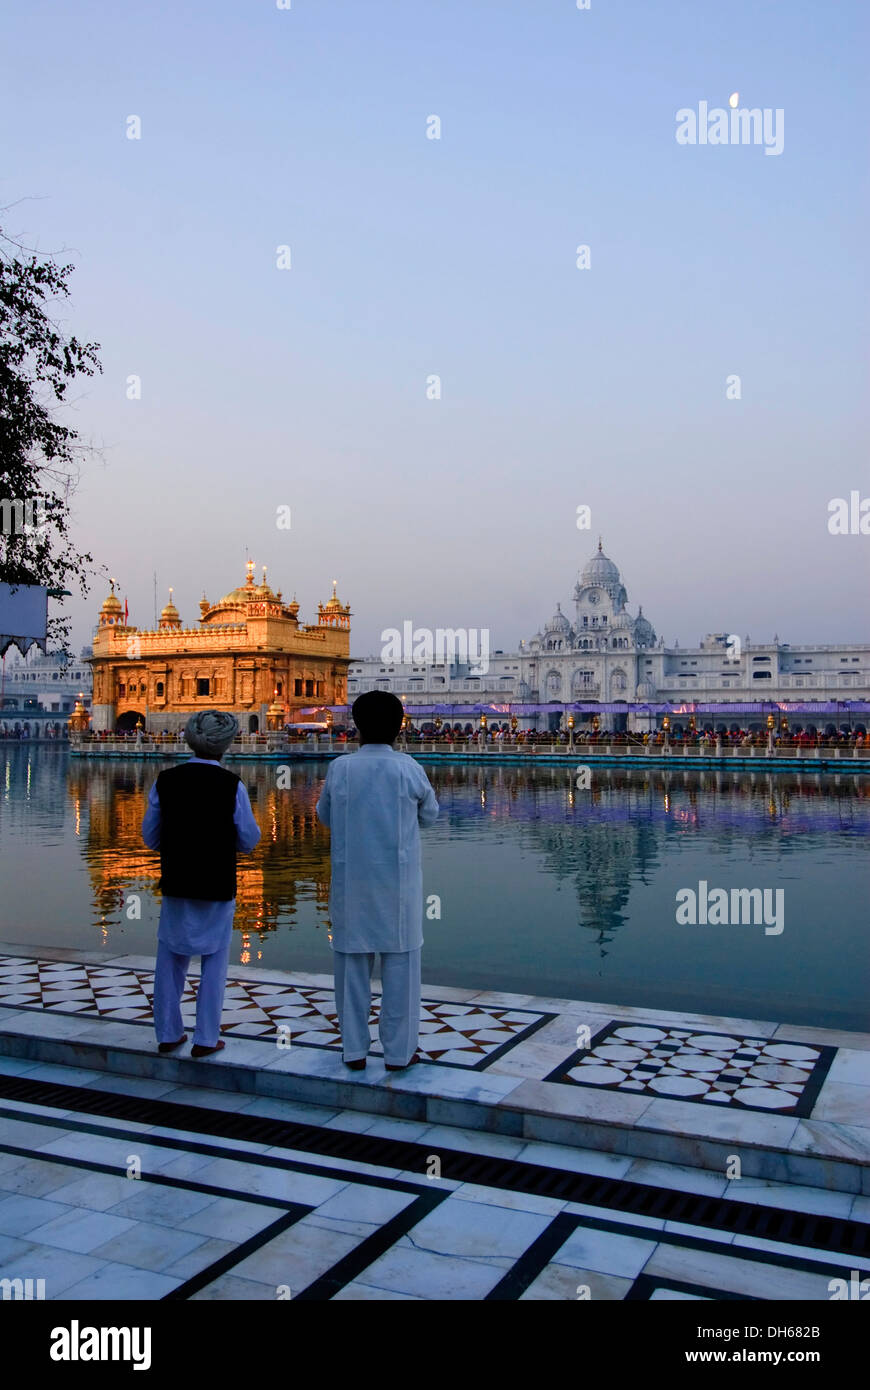 Sikhs looking at the Golden Temple, Amritsar, India, Asia Stock Photo